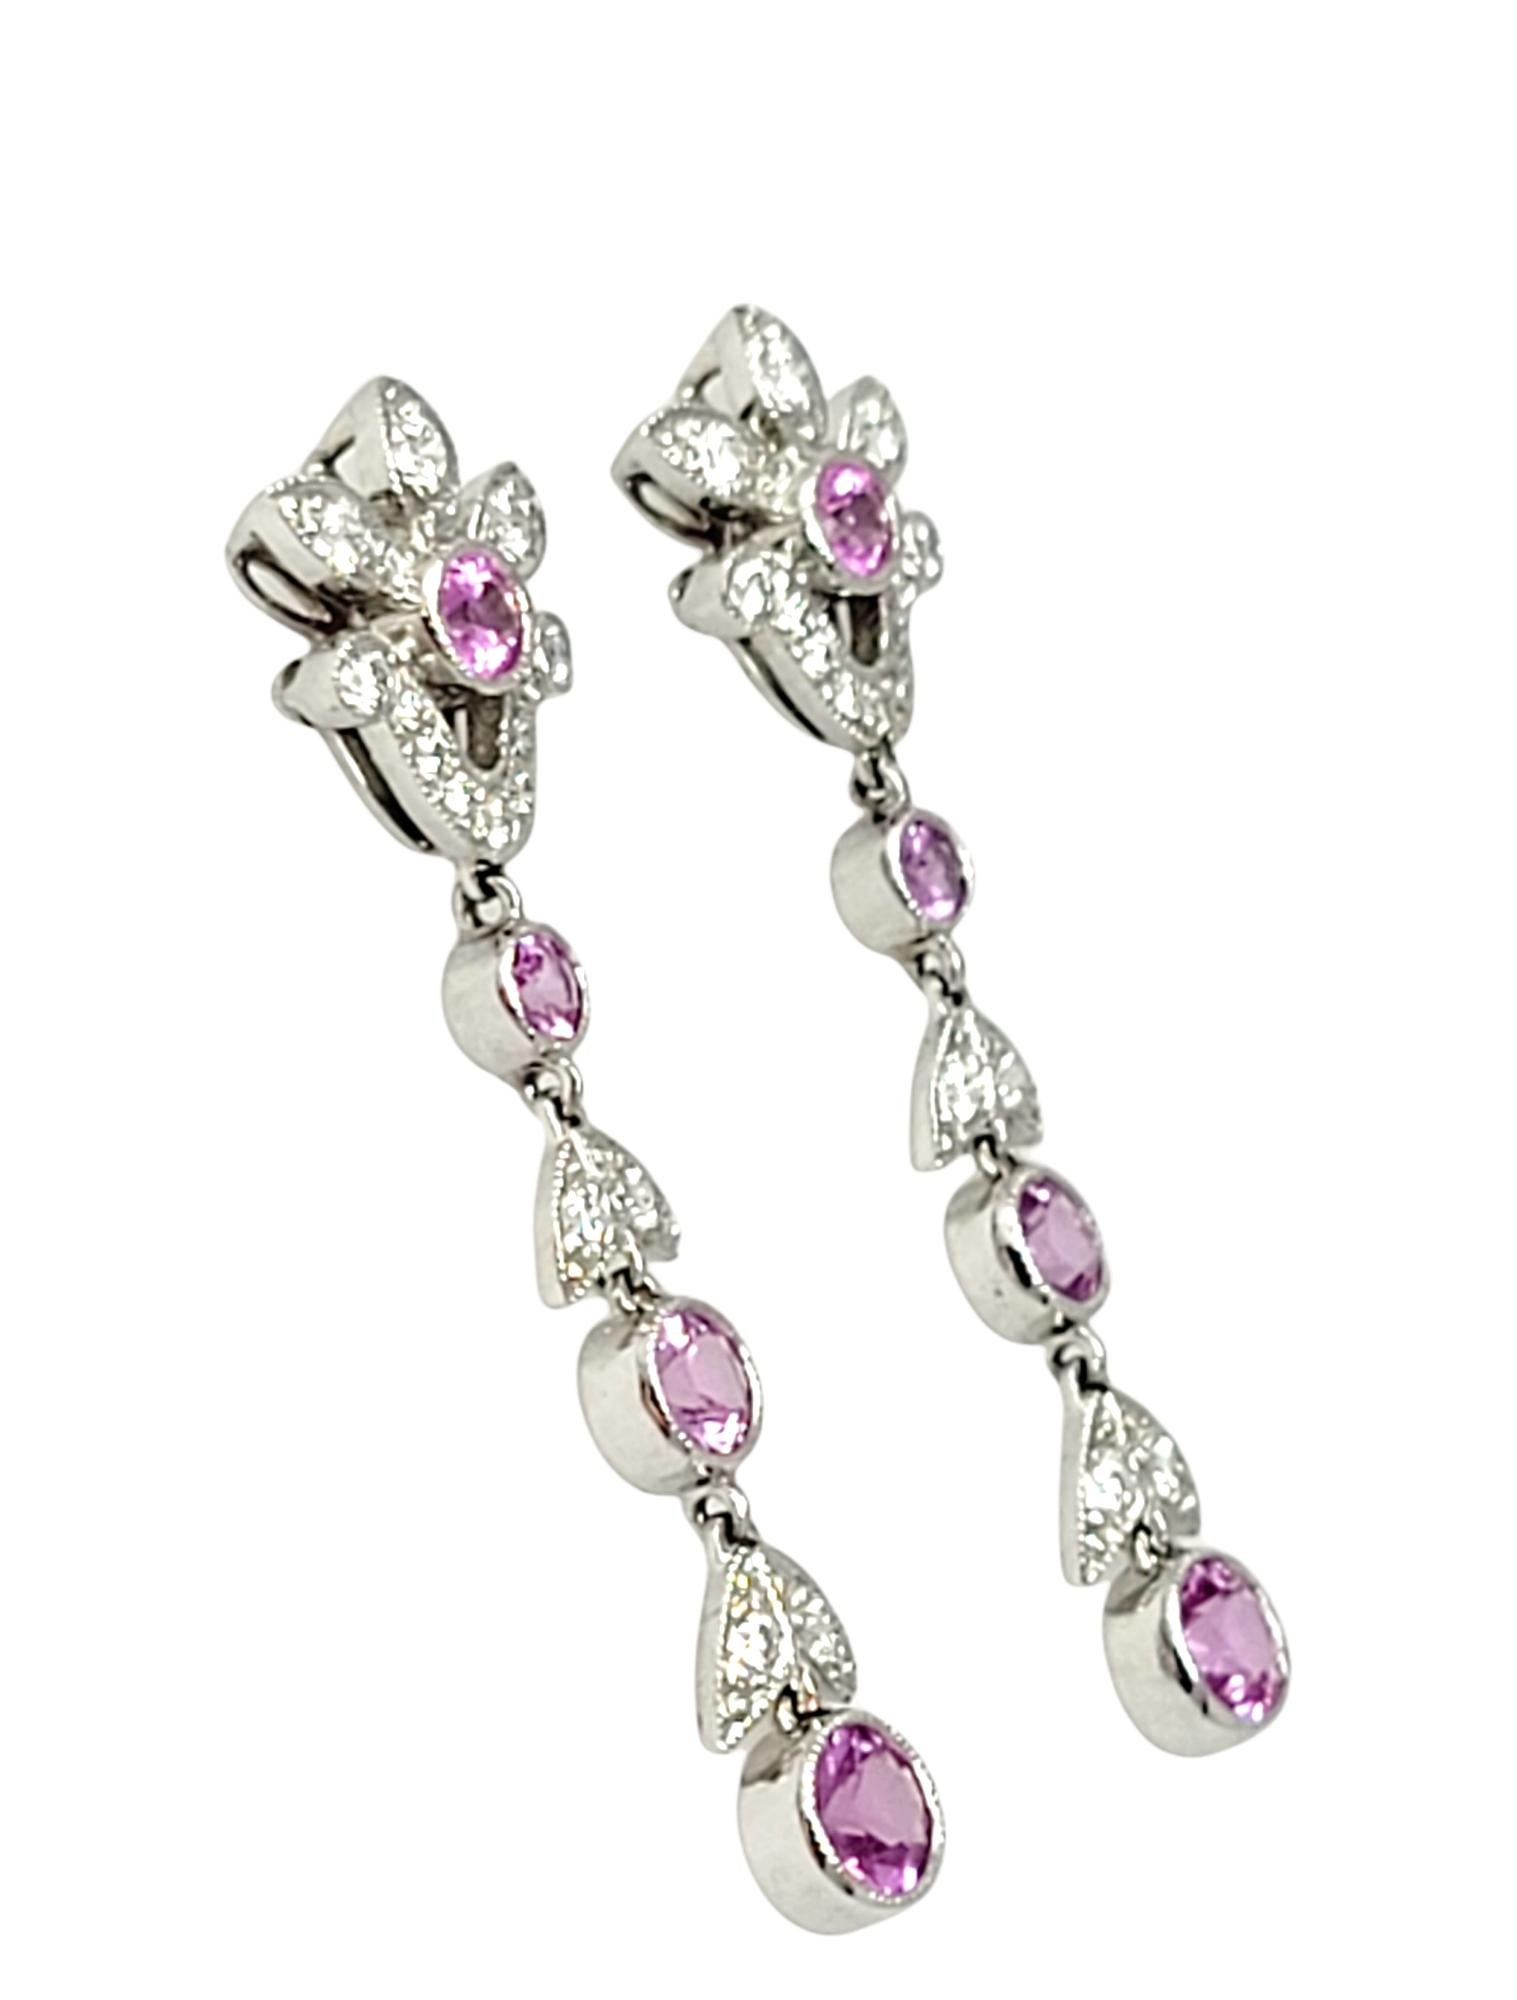 Gorgeous natural pink sapphire and diamond dangle earrings by Tiffany & Co.. These elegant, romantic earrings feature an embellished floral motif with milgrain detailing throughout. The gentle movement catches the light and sparkles beautifully on